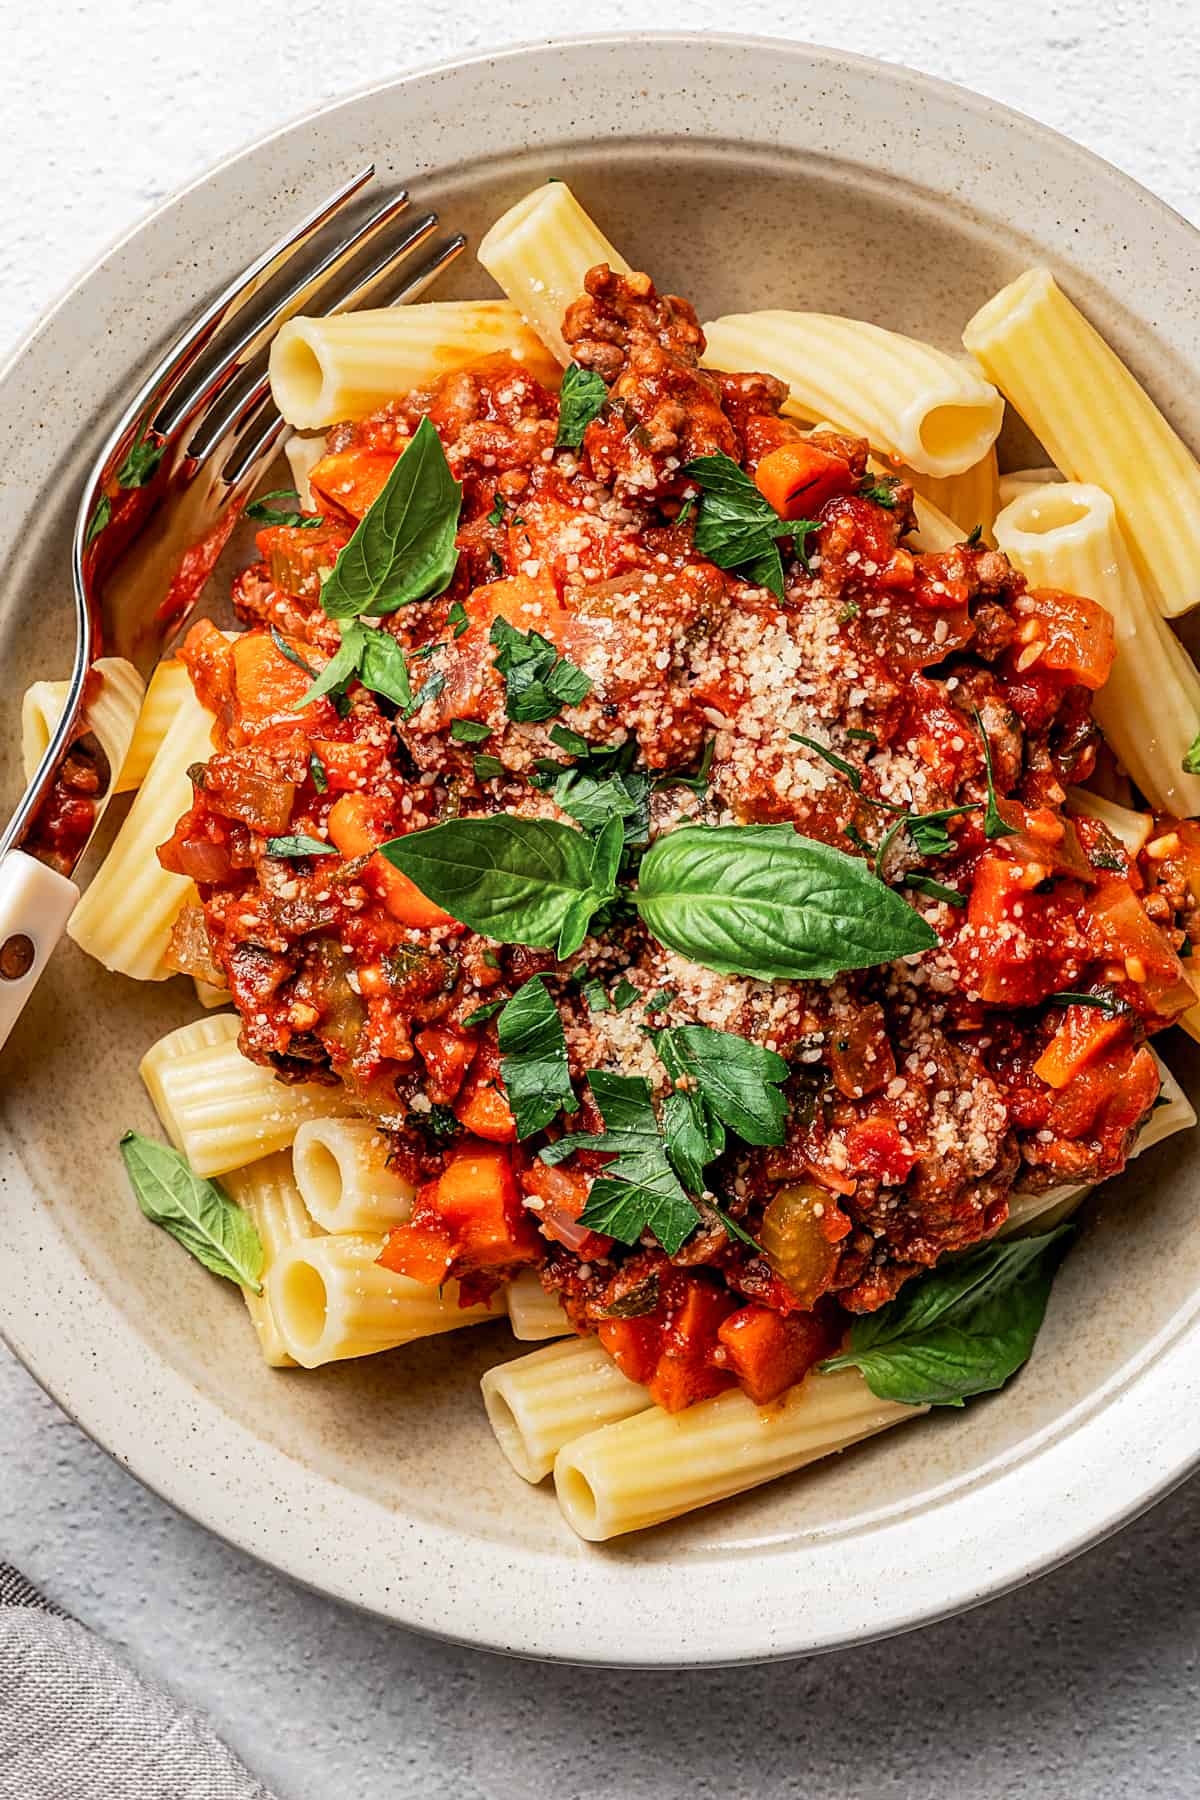 A bowl of pasta bolognese.